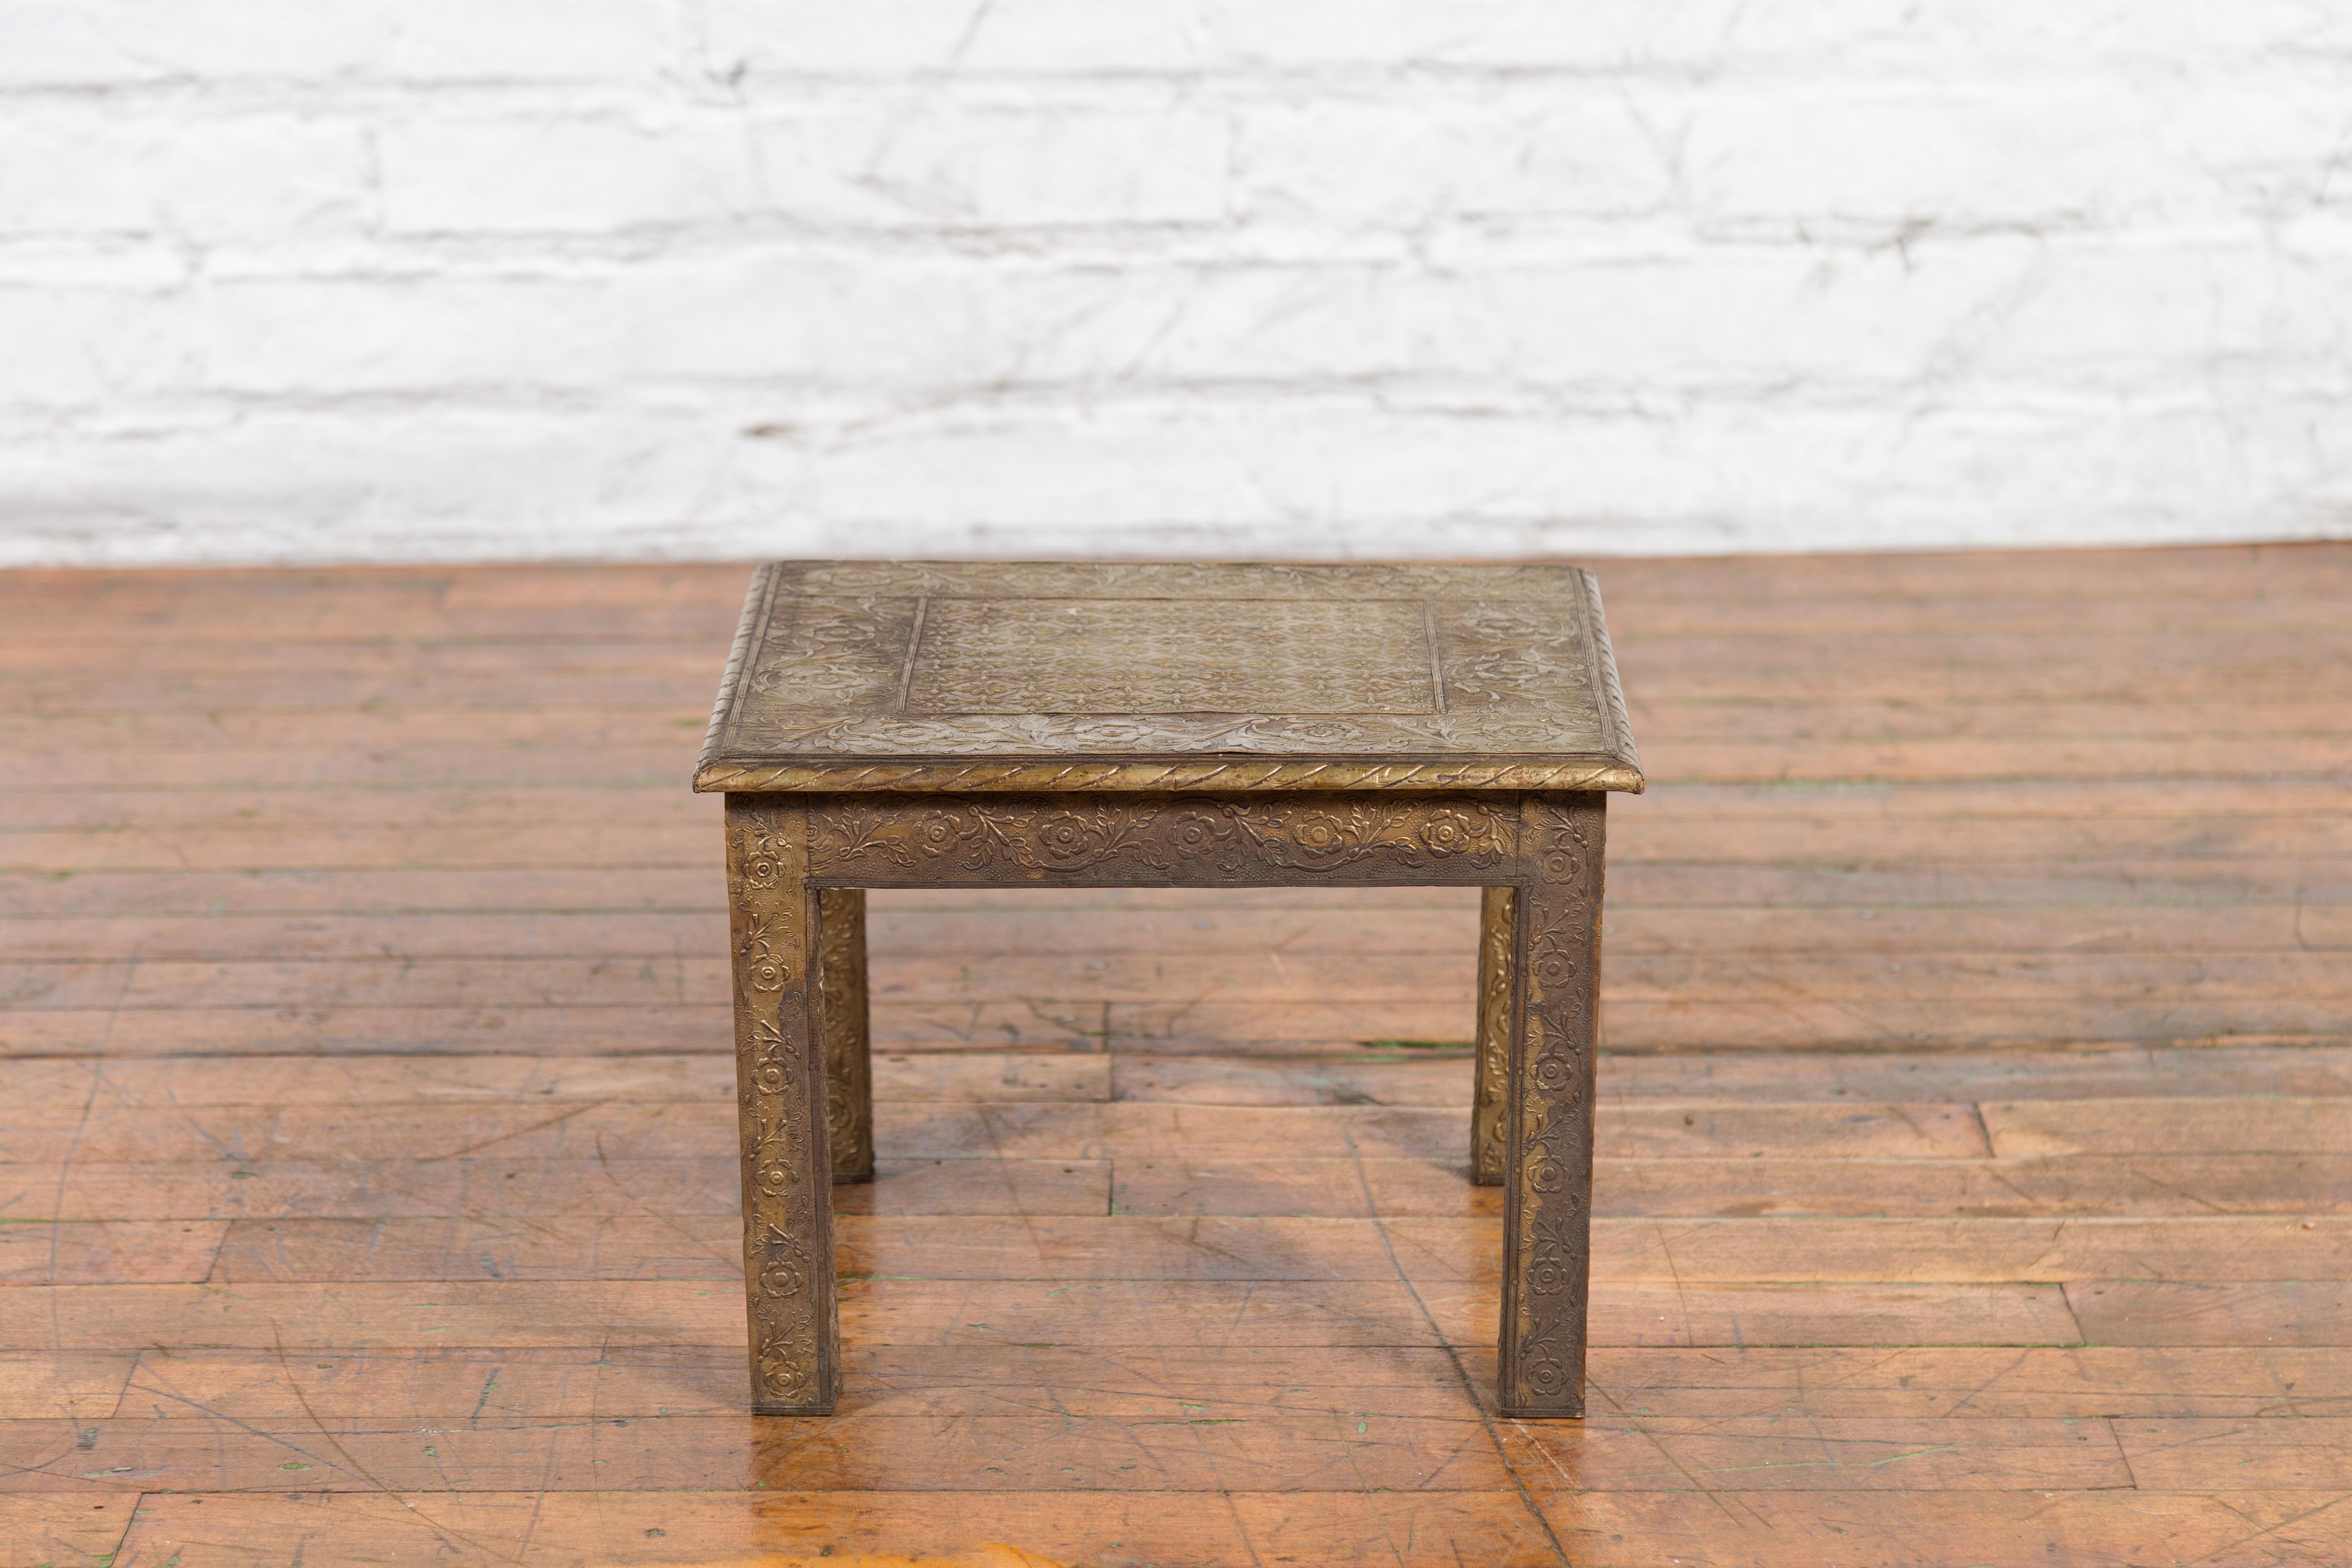 A vintage square-shaped Indian side table from the mid 20th century, with repoussé motifs. Created in India during the midcentury period, this side table features a square shaped top adorned with a repoussé floral frieze surrounding petite rosettes.